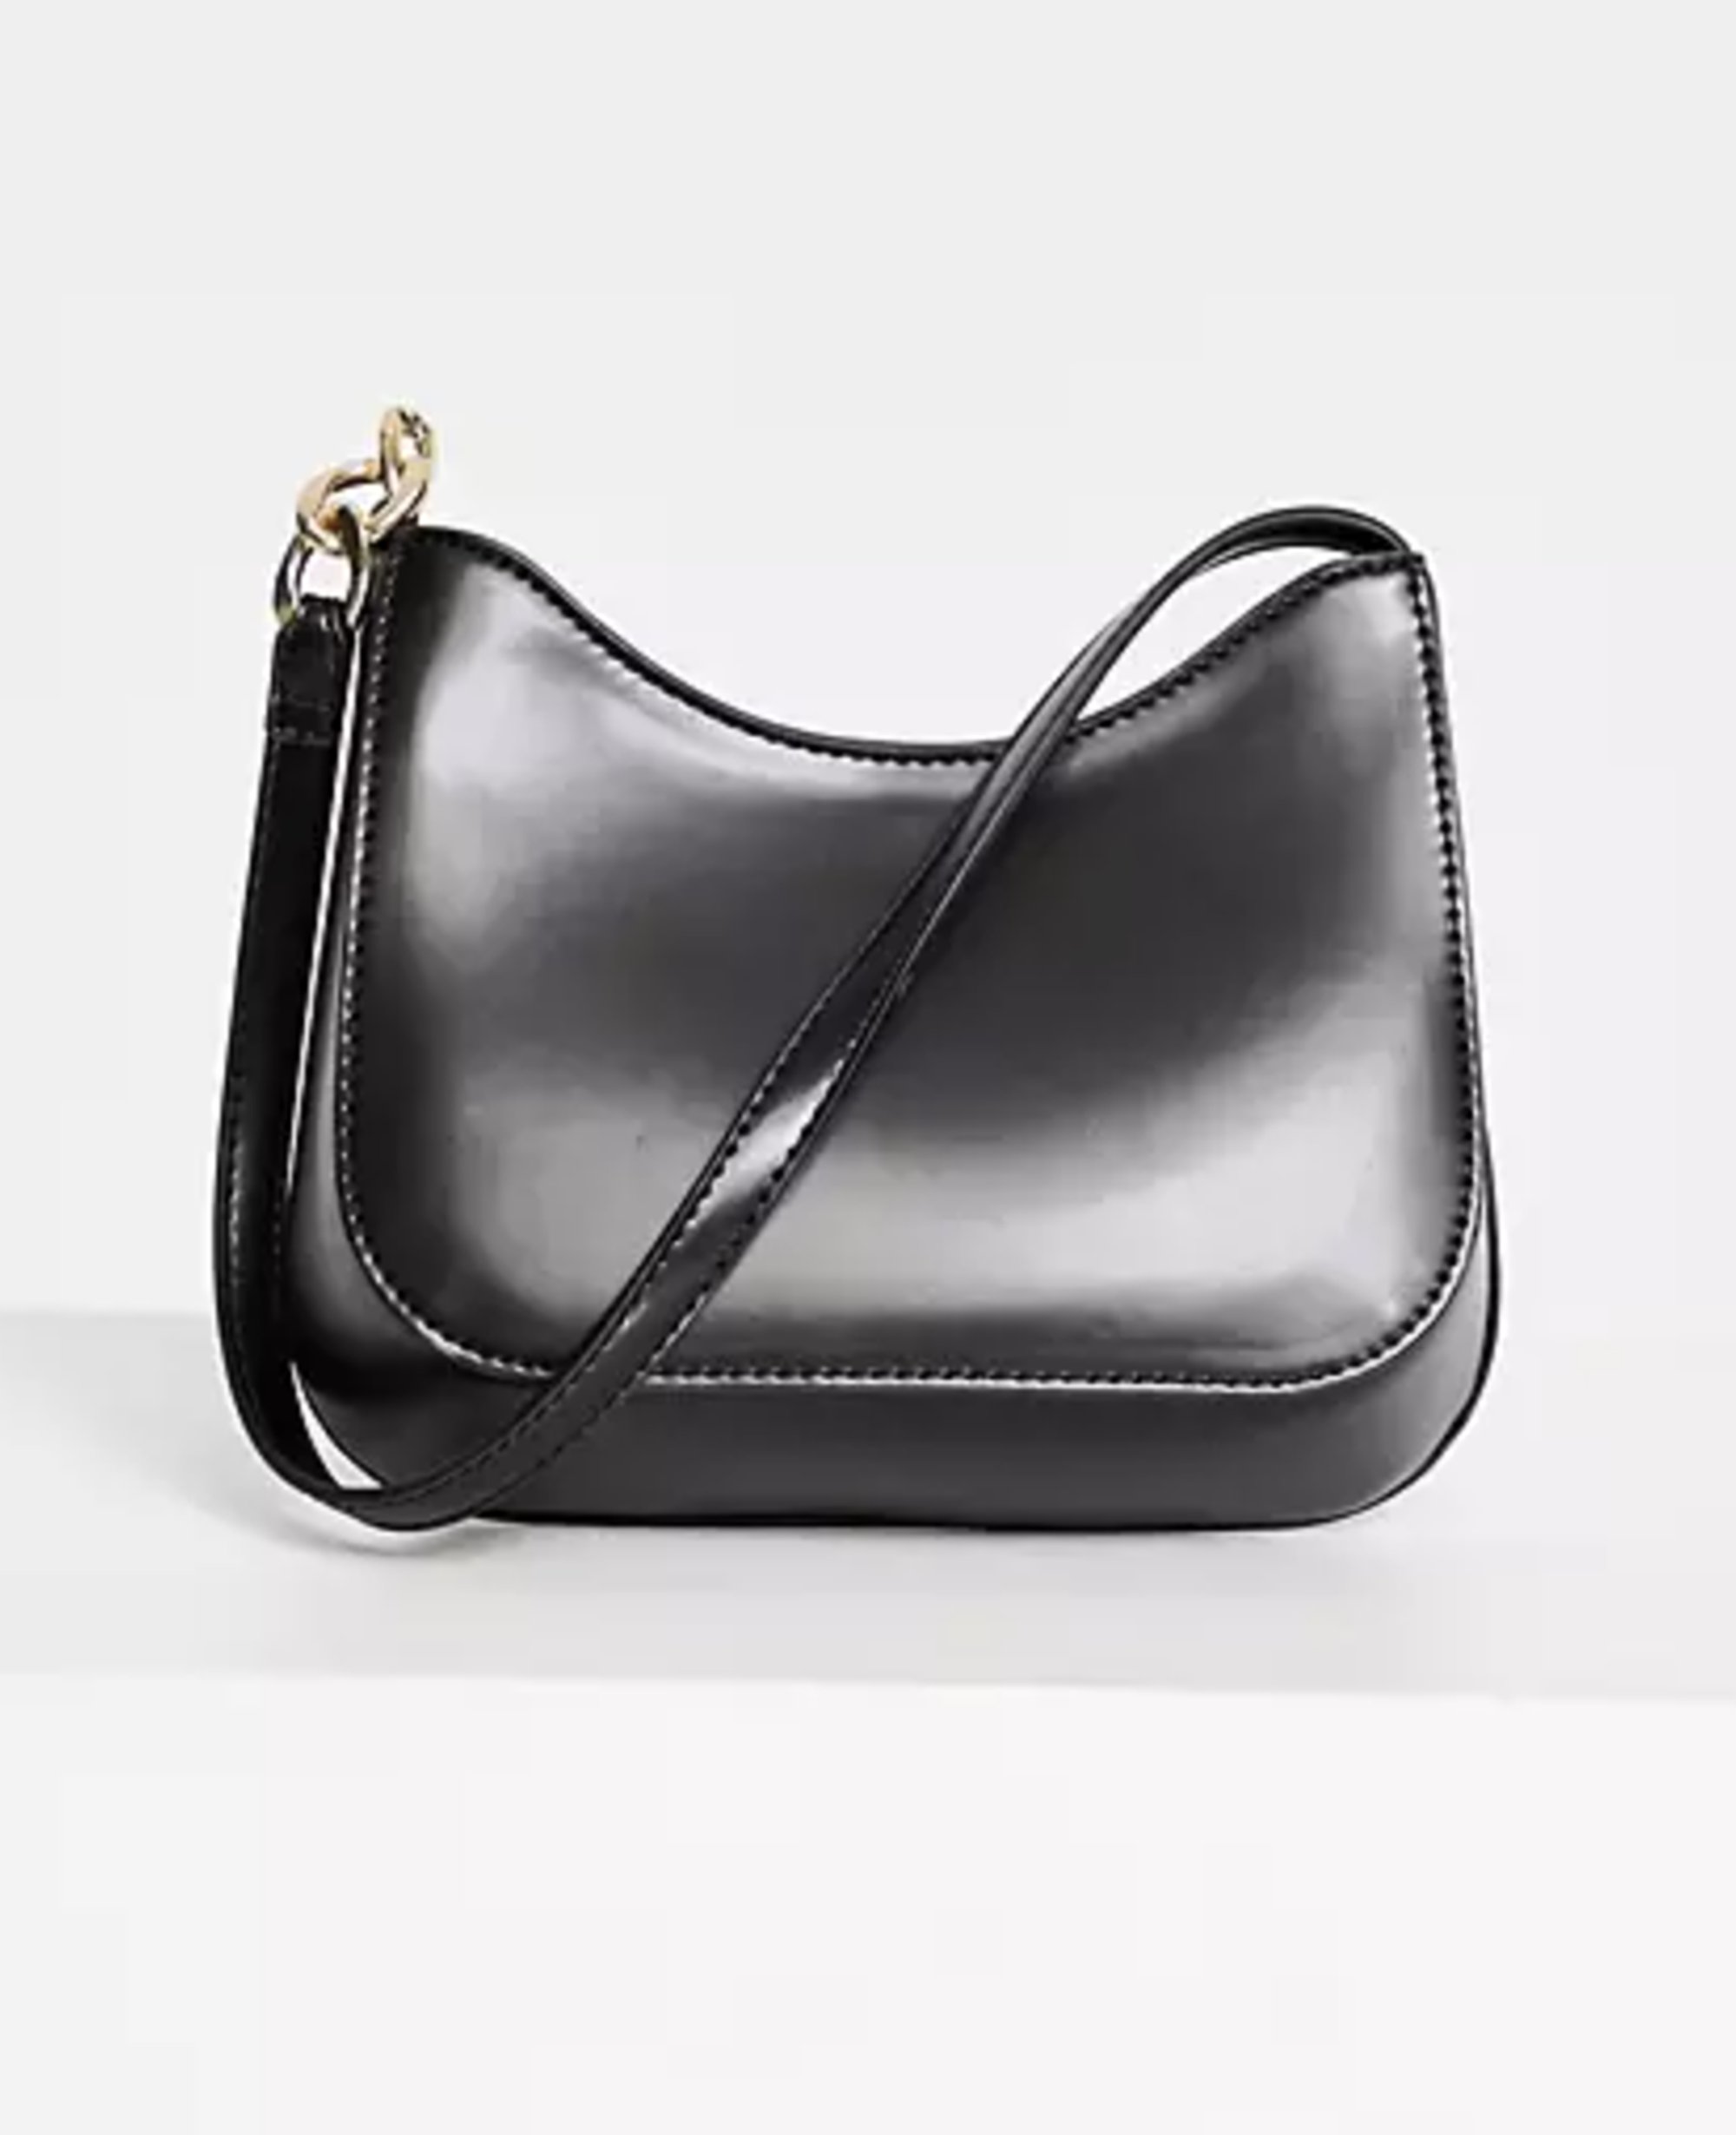 These Are The Best Prada Bag Dupes You Can Get - The Chic Pick